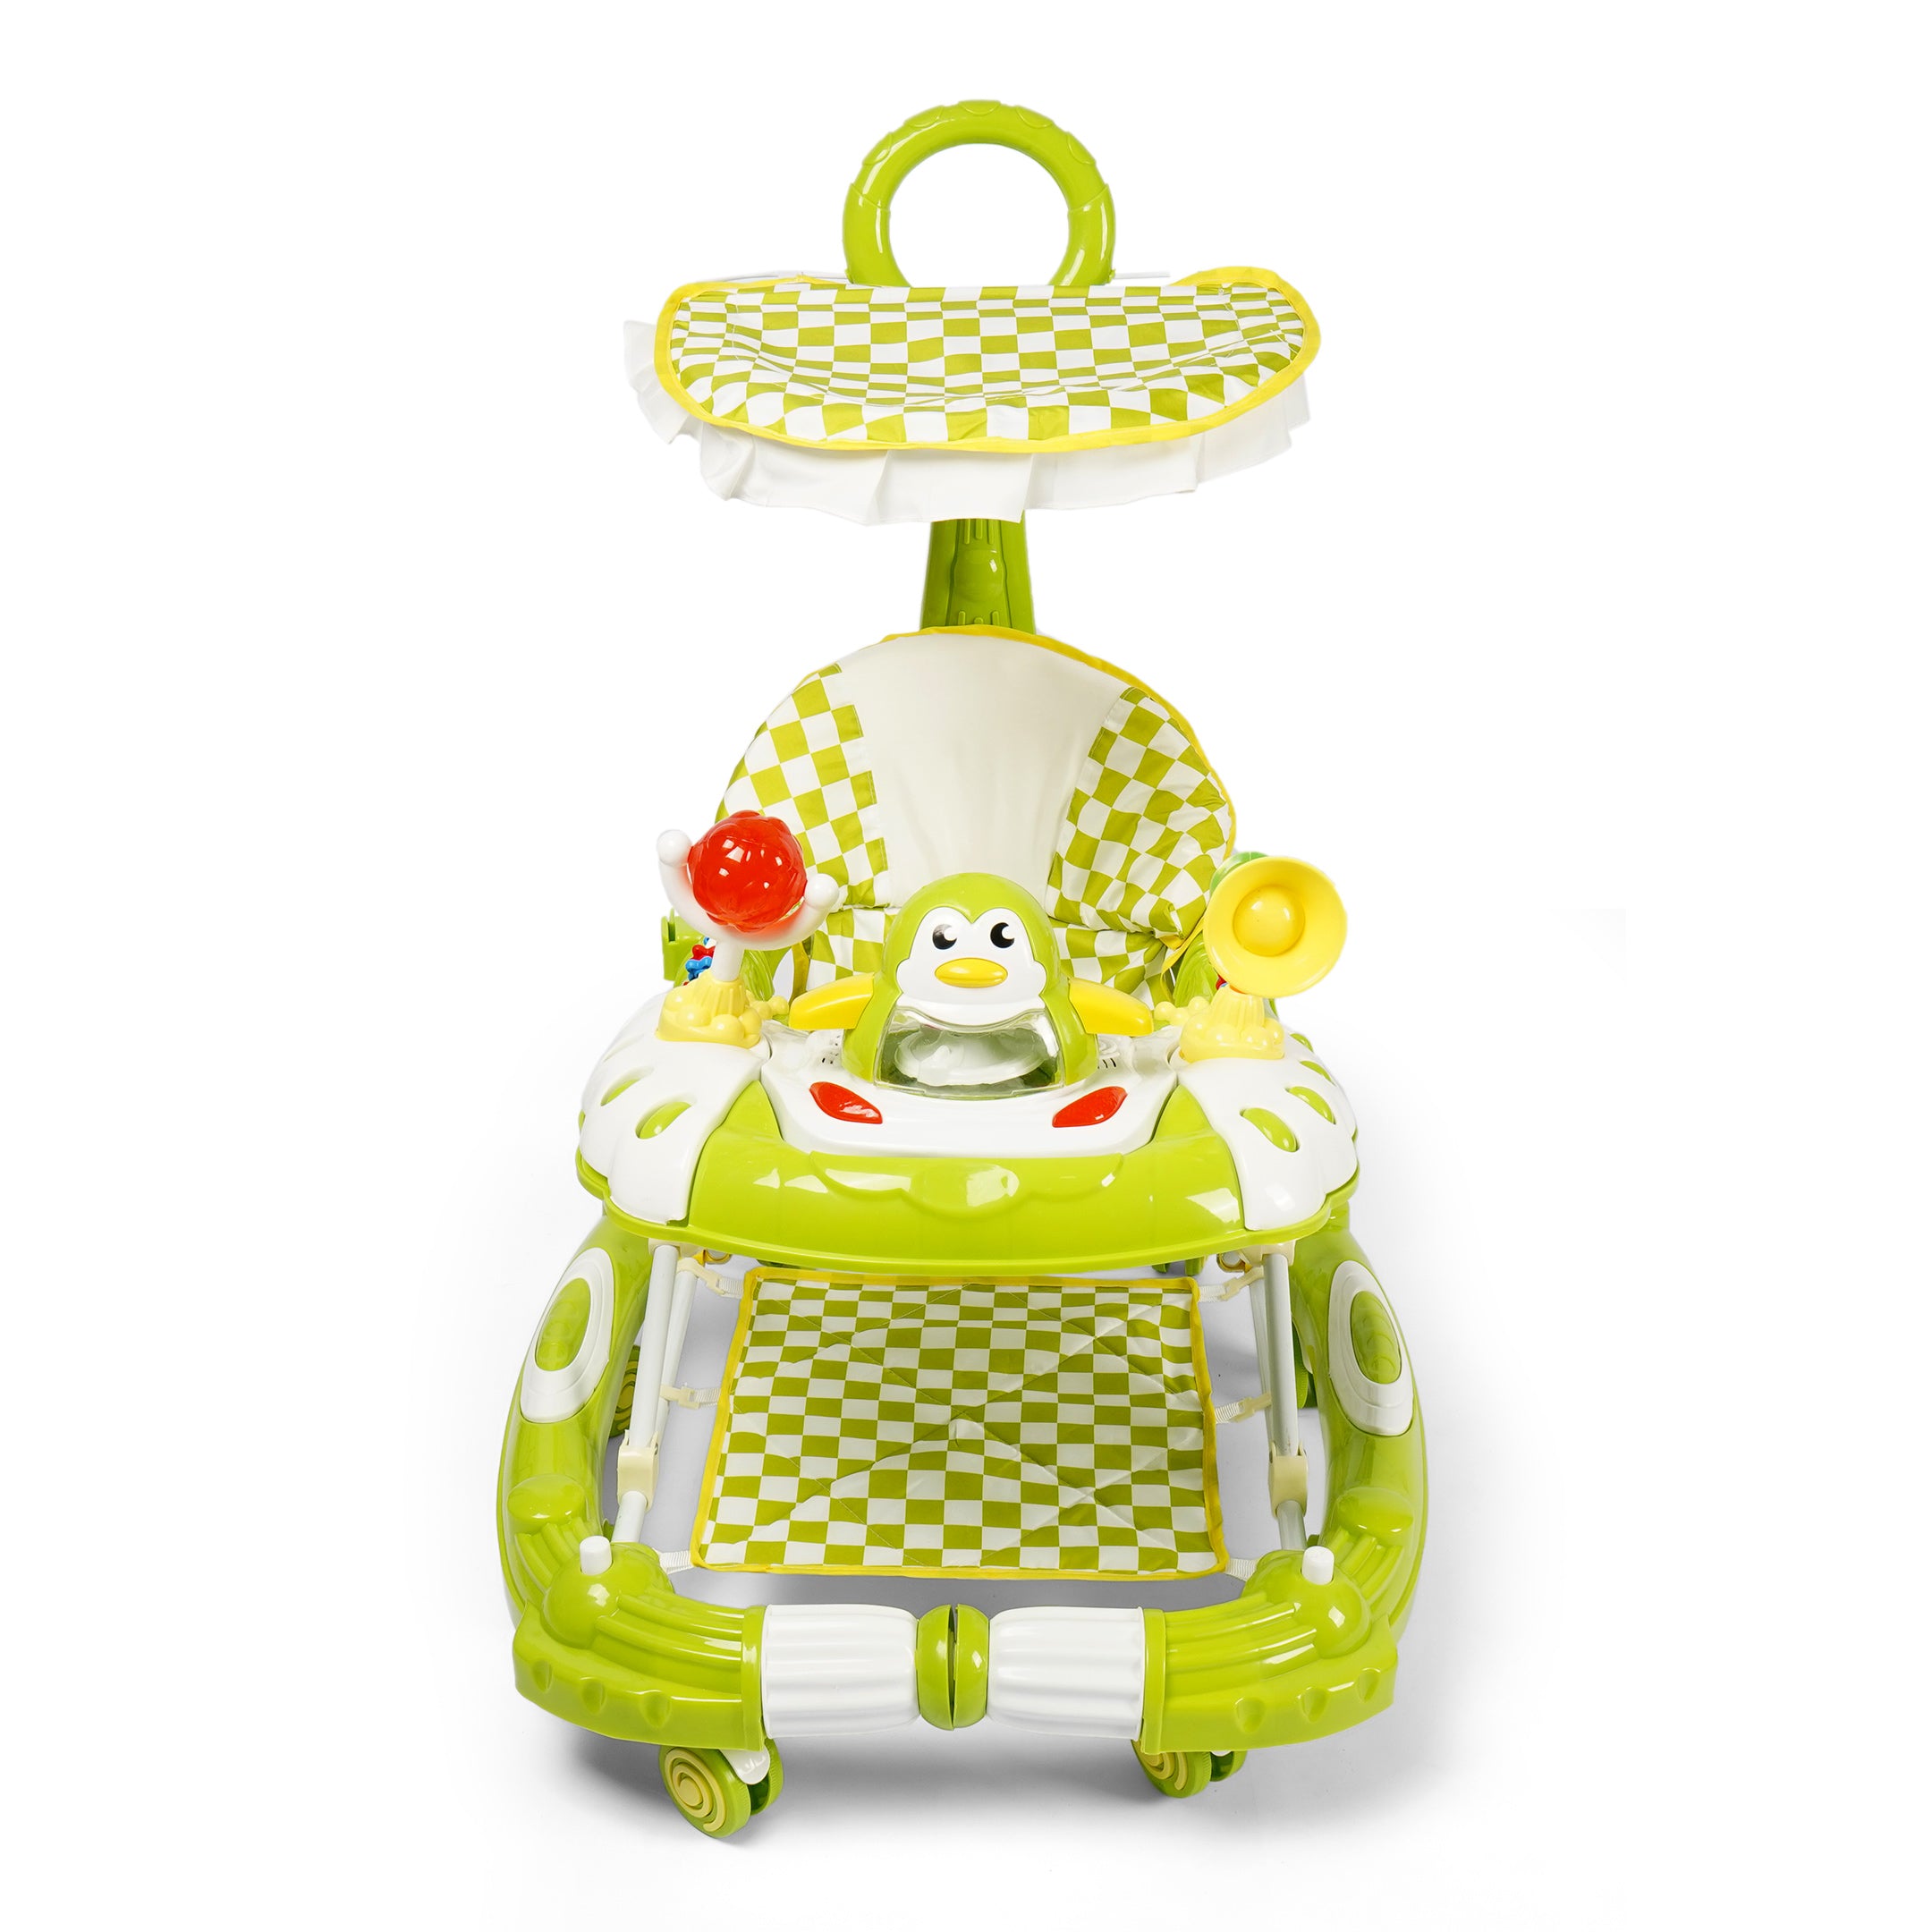 2-in-1 Baby Walker with Canopy & Push Bar - Green